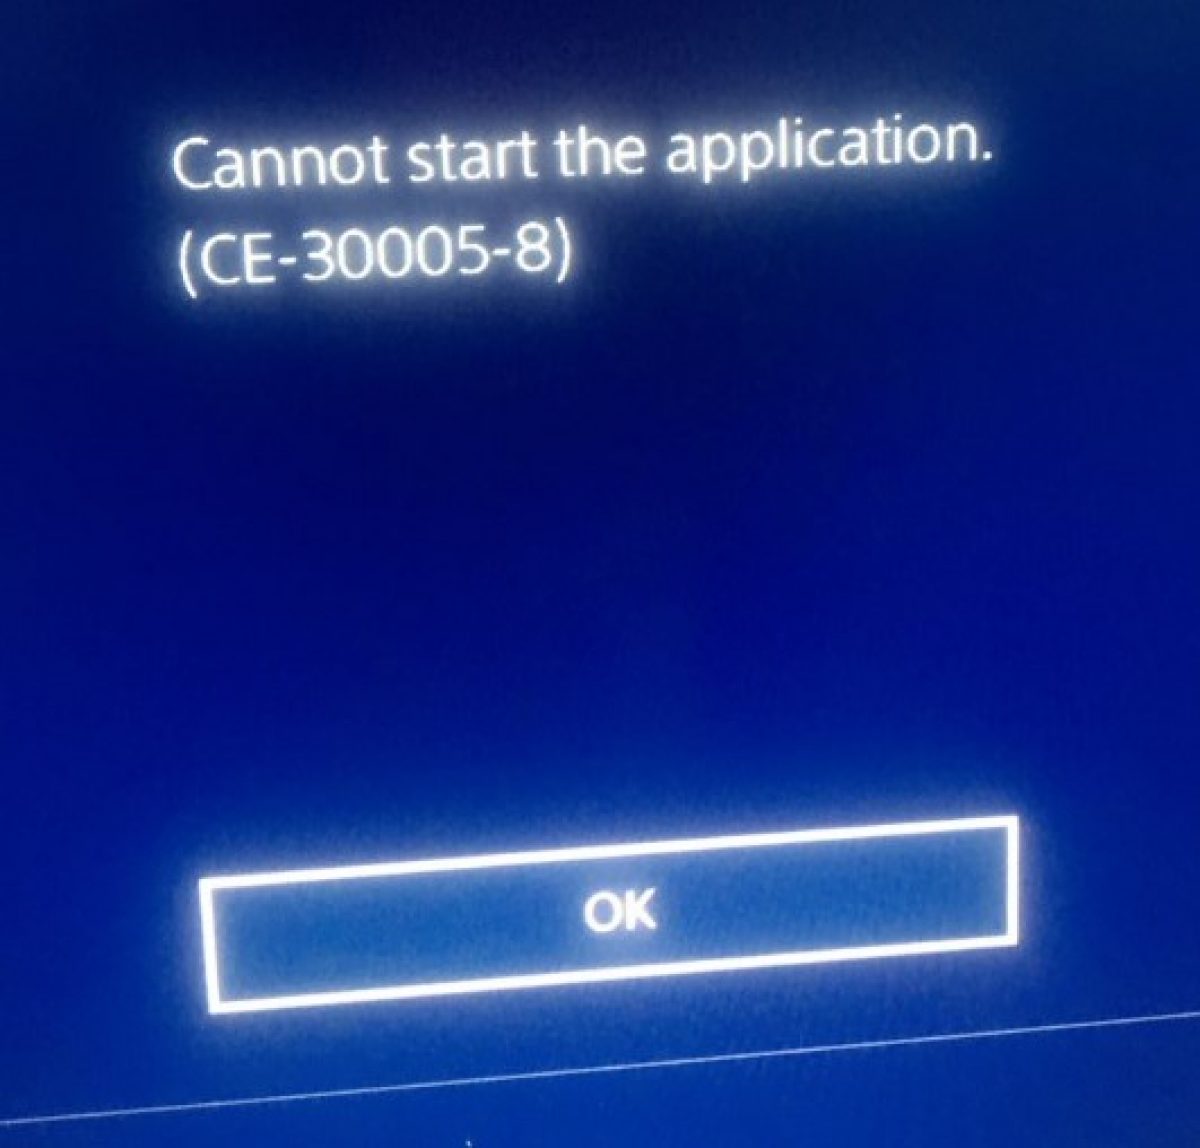 polilla Maniobra ampliar How To Fix PS4 CE-30005-8 Error (Cannot Start Application) | NEW in 2022! –  The Droid Guy